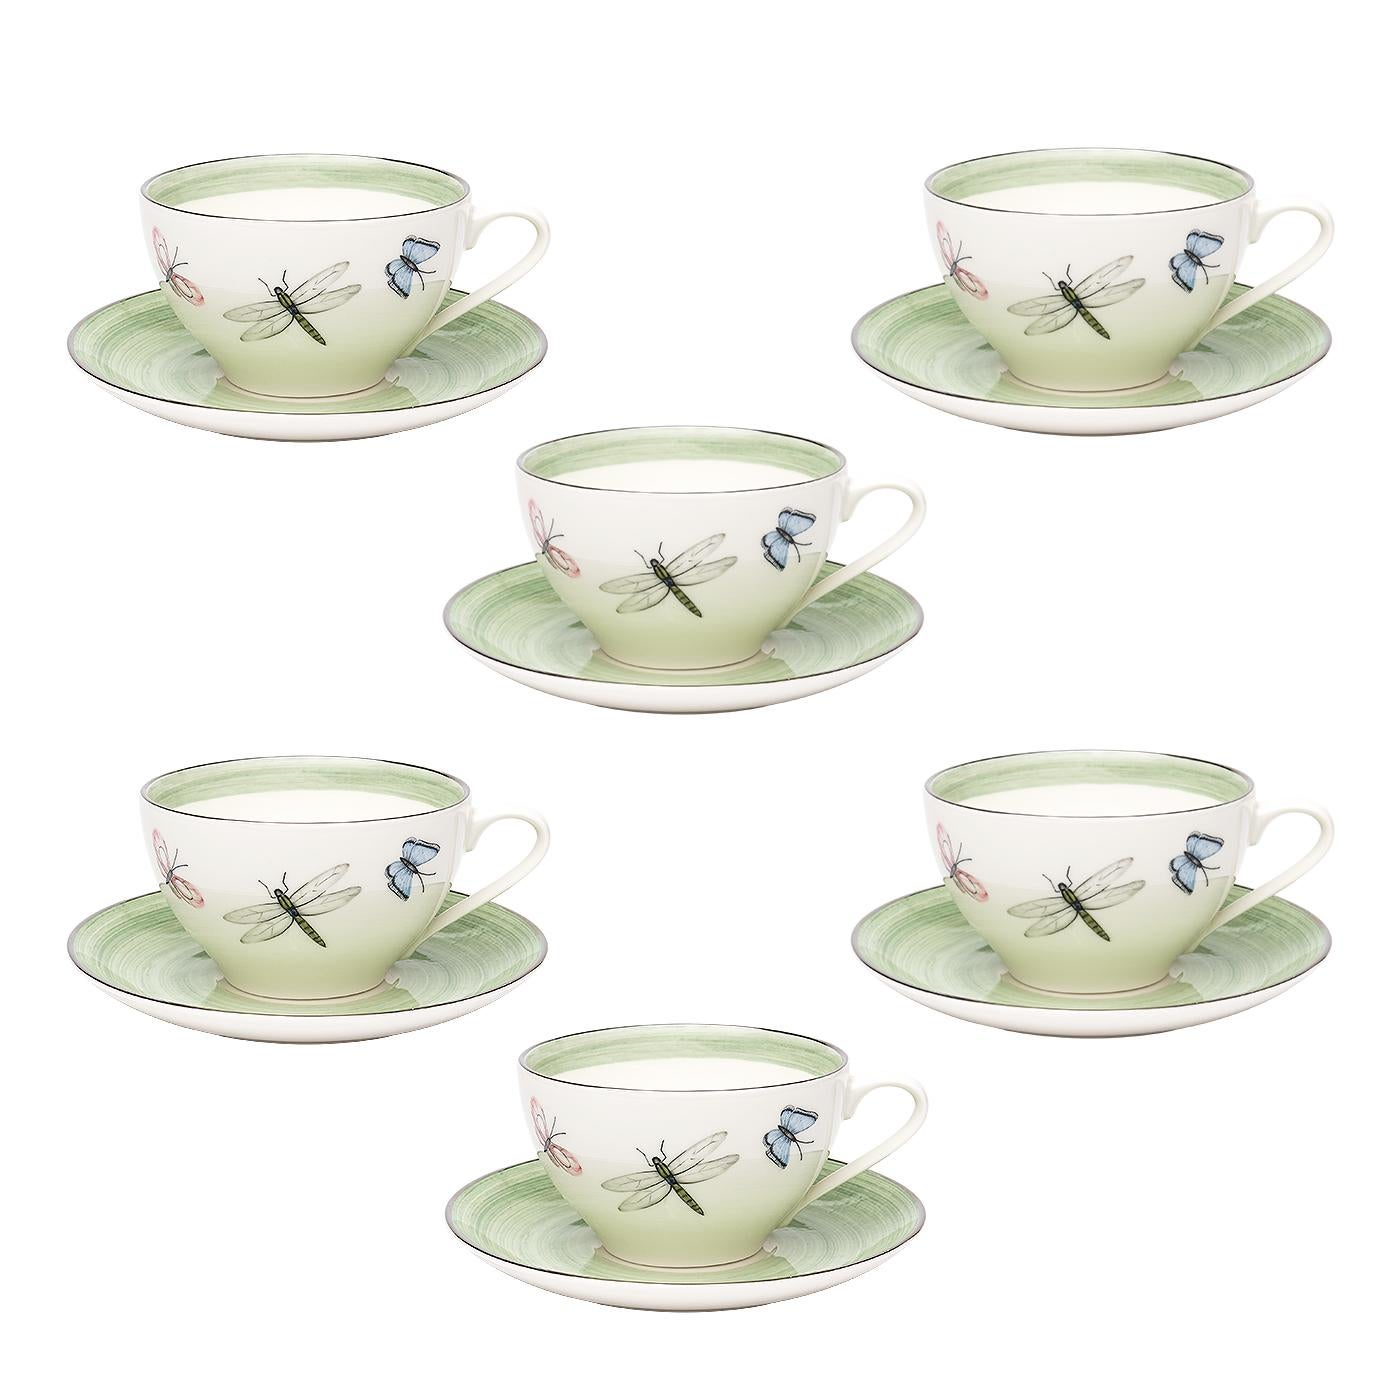 Modern Set of Six Porcelain Tea Cups Butterfly Decor Sofina Boutique Kitzbuehel In New Condition For Sale In Kitzbuhel, AT